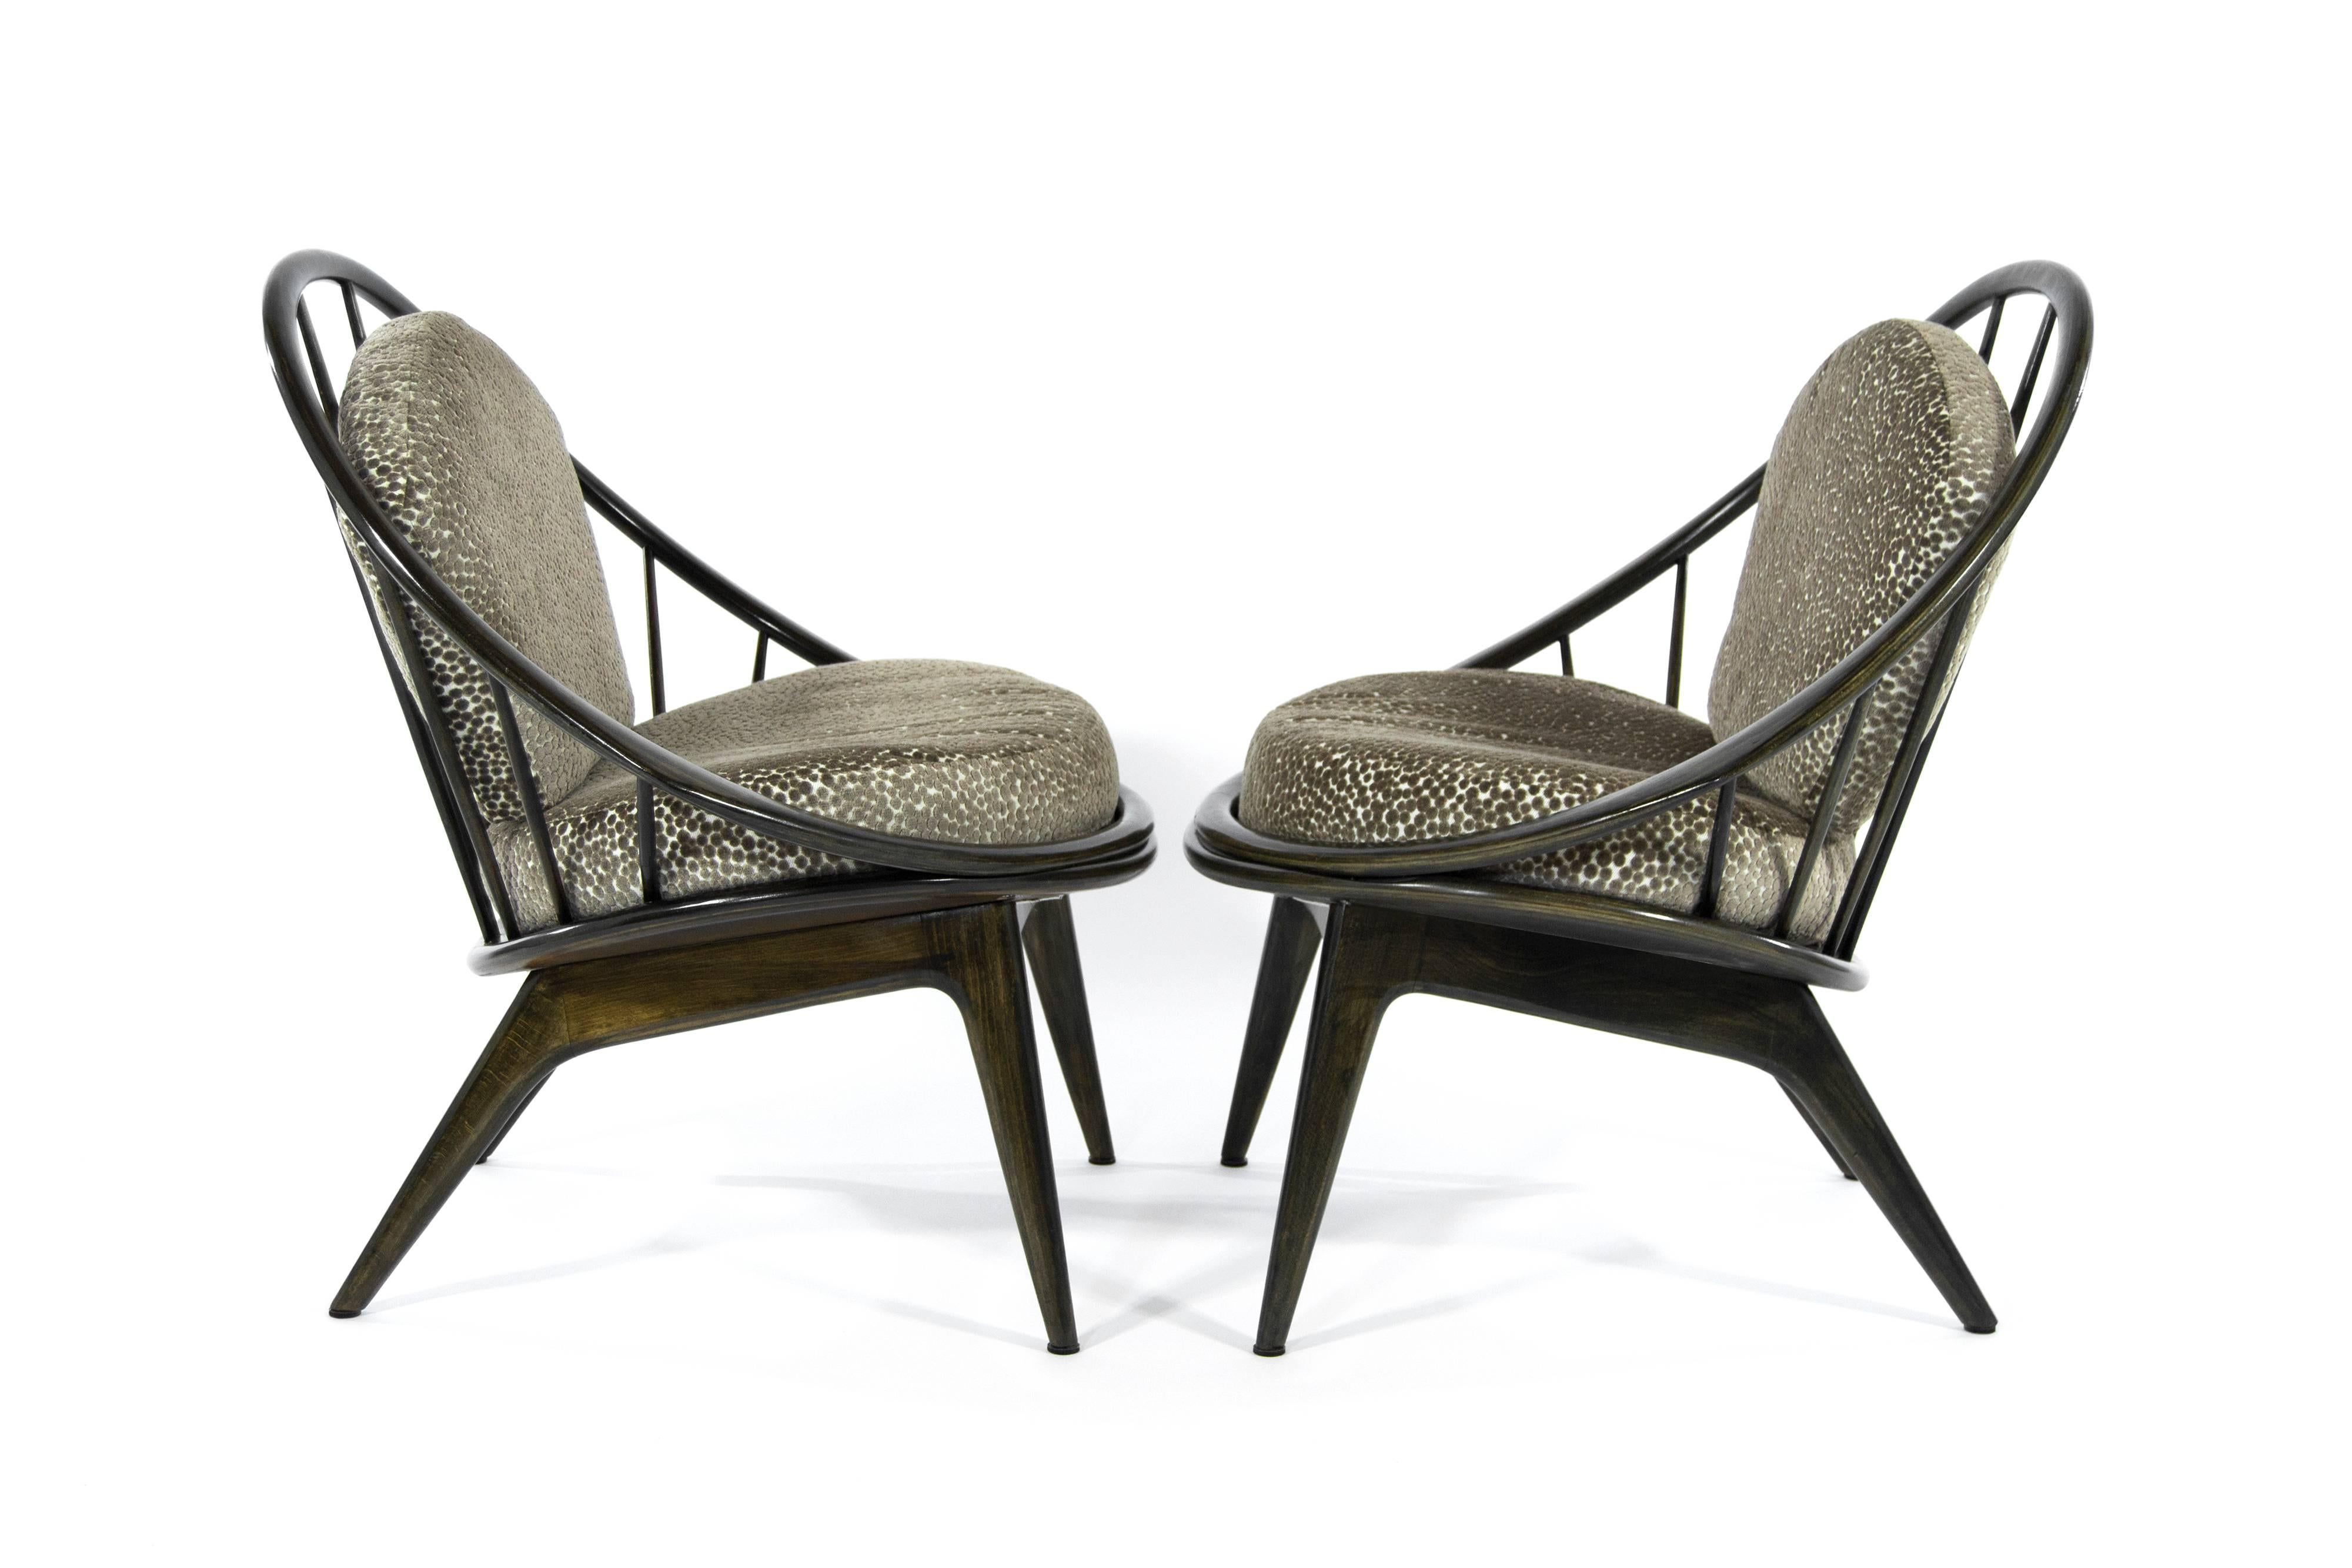 Rare pair of lounge chairs denominated "The Hoop Chairs" by Ib Kofod-Larsen for Selig, Denmark, circa 1959.

Walnut frames fully restored. New cushions upholstered in a polka dot embossed velvet.